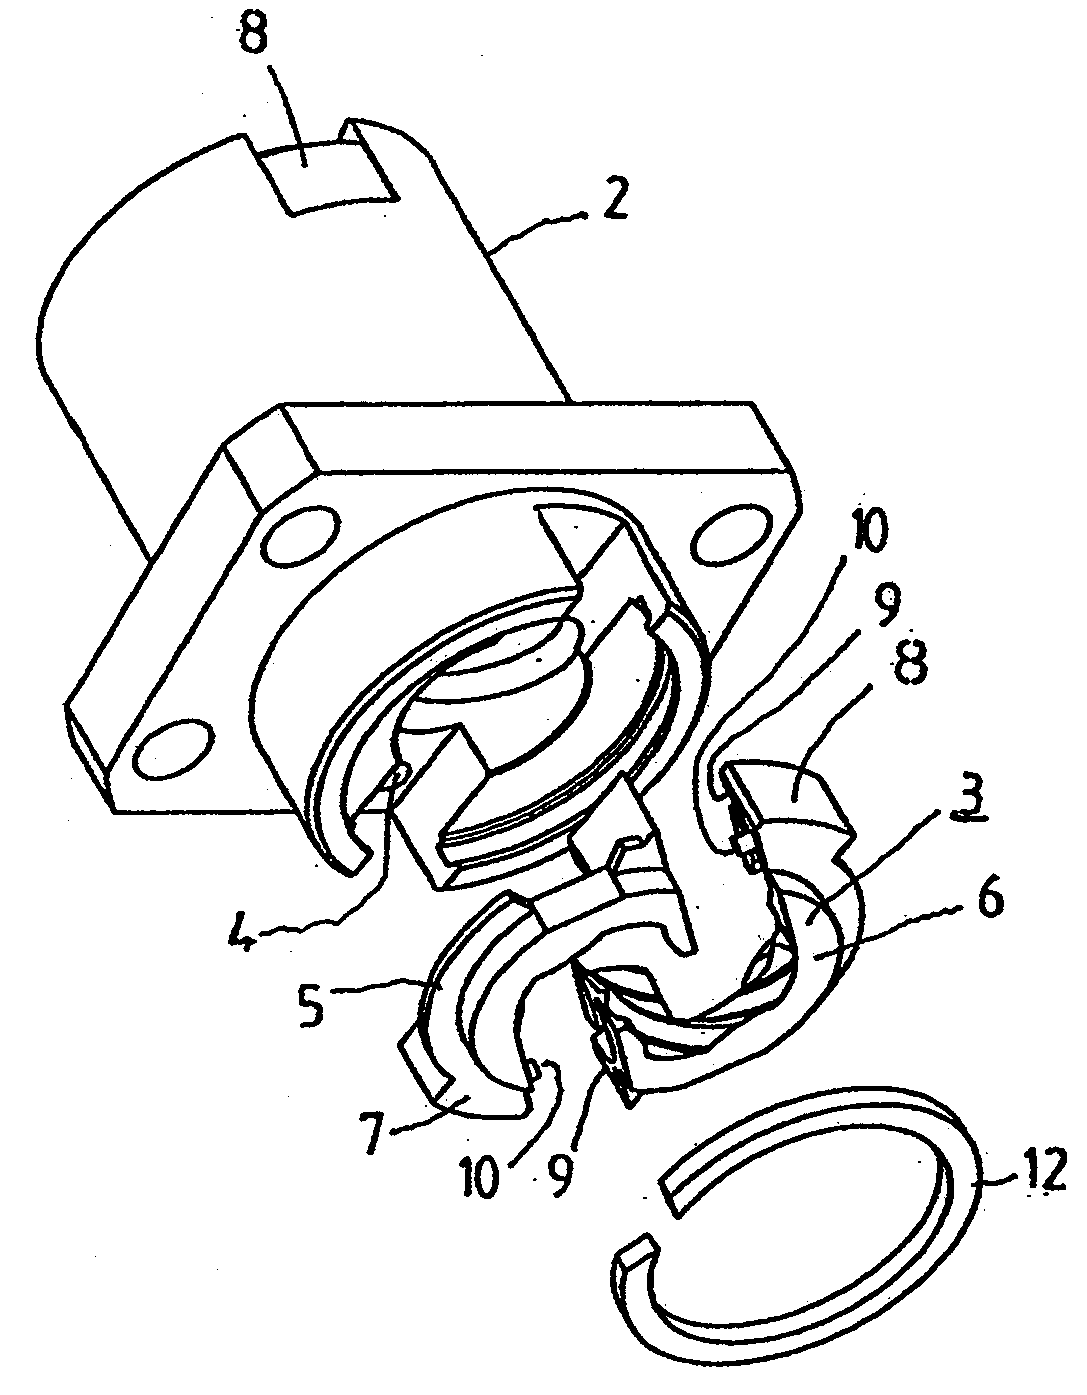 Recirculating ball screw and nut drive